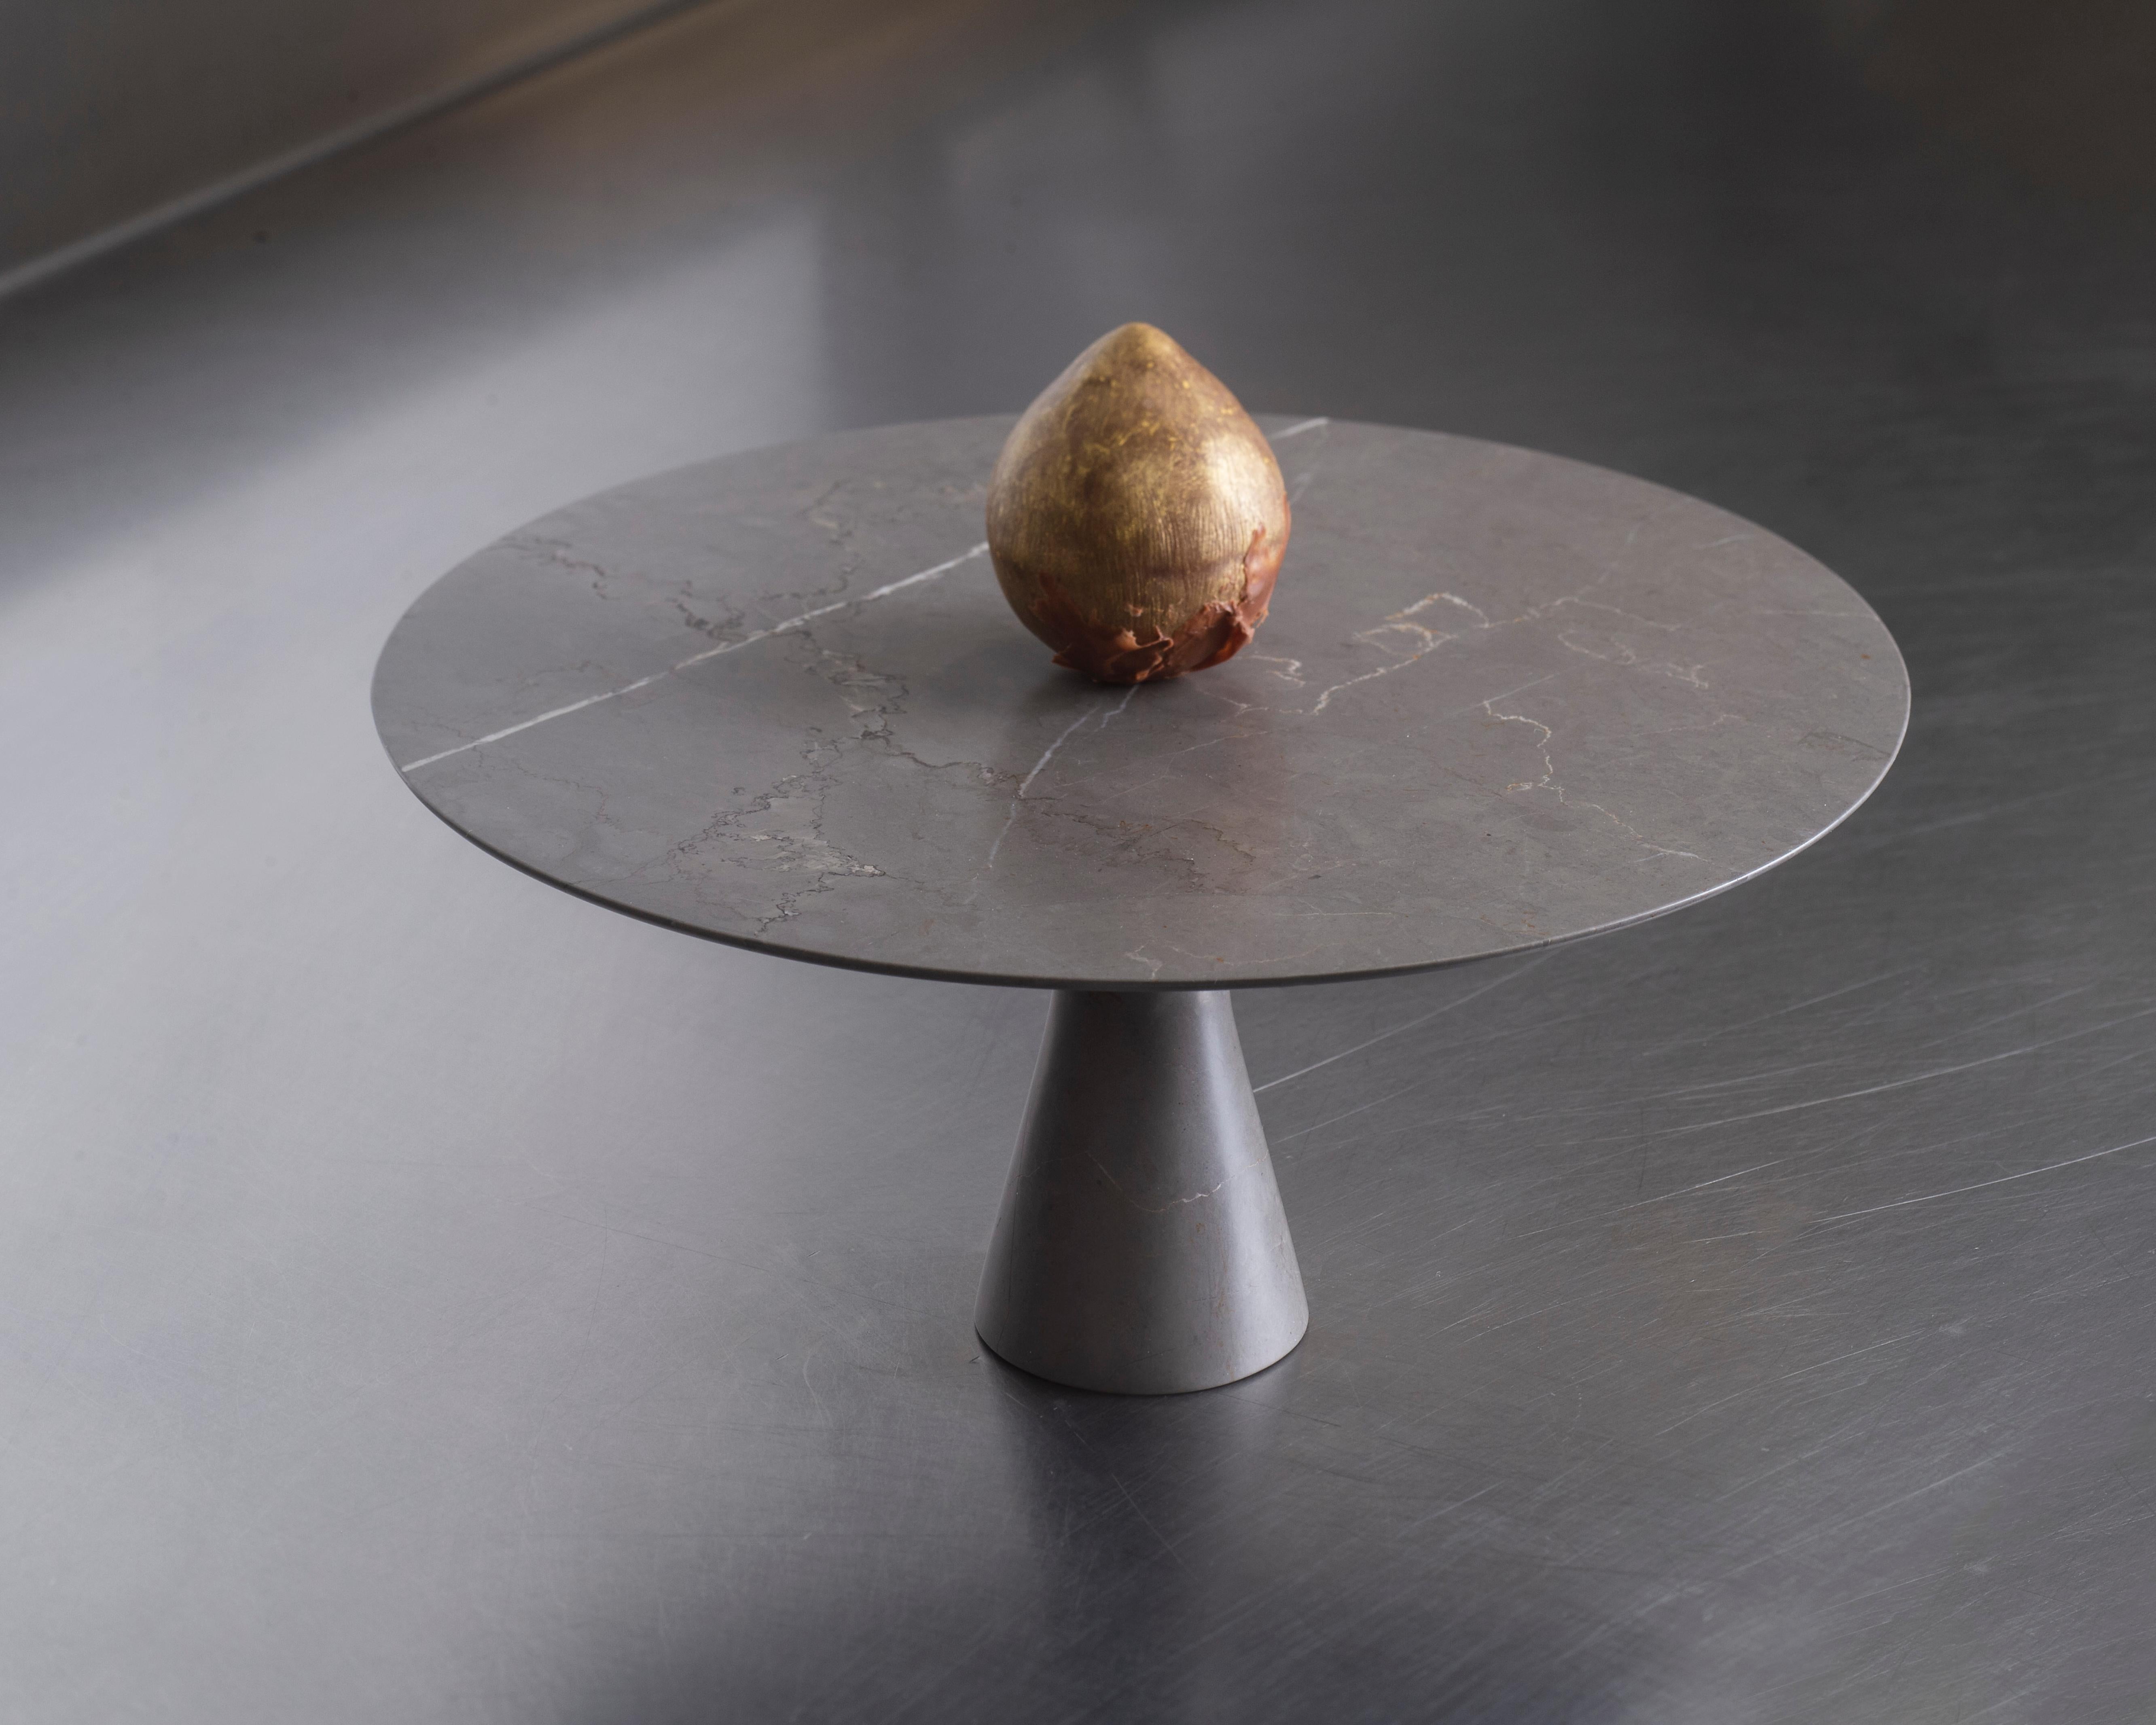 Refined Contemporary marble serving plate.
Dimensions: ø 32 x 15 cm H

Angelo O is the little brother and scale model of the natural stone table Angelo M. Angelo O can ideally be used as a cake plate, cheese platter or to serve other